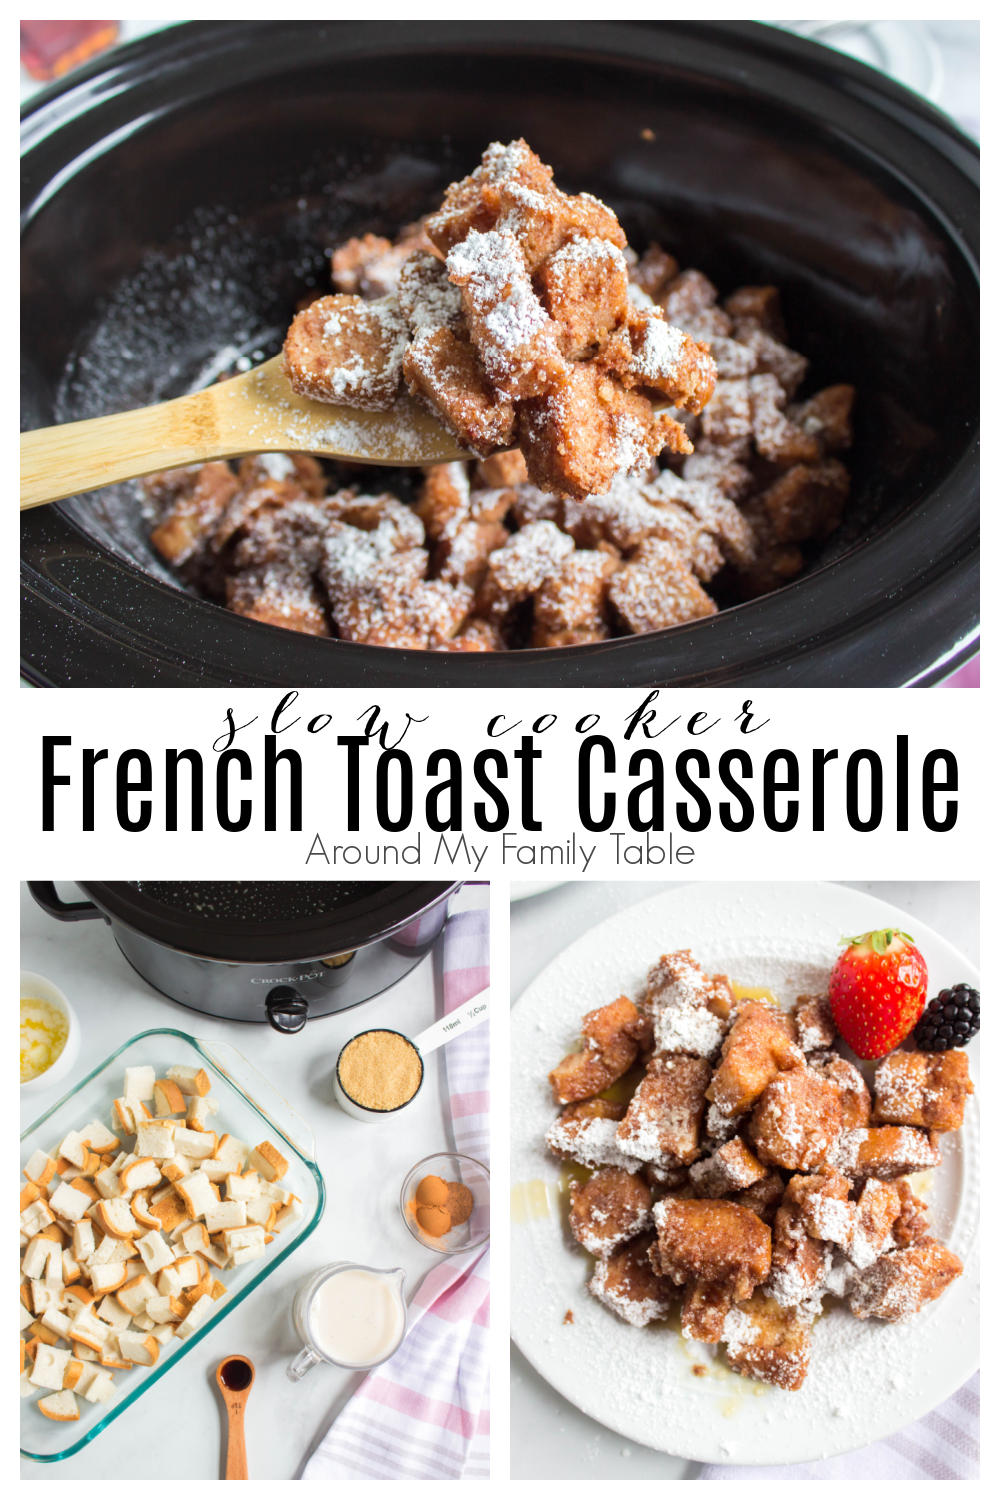 https://www.aroundmyfamilytable.com/wp-content/uploads/2021/01/slow-cooker-french-toast-casserole_collage-1.png